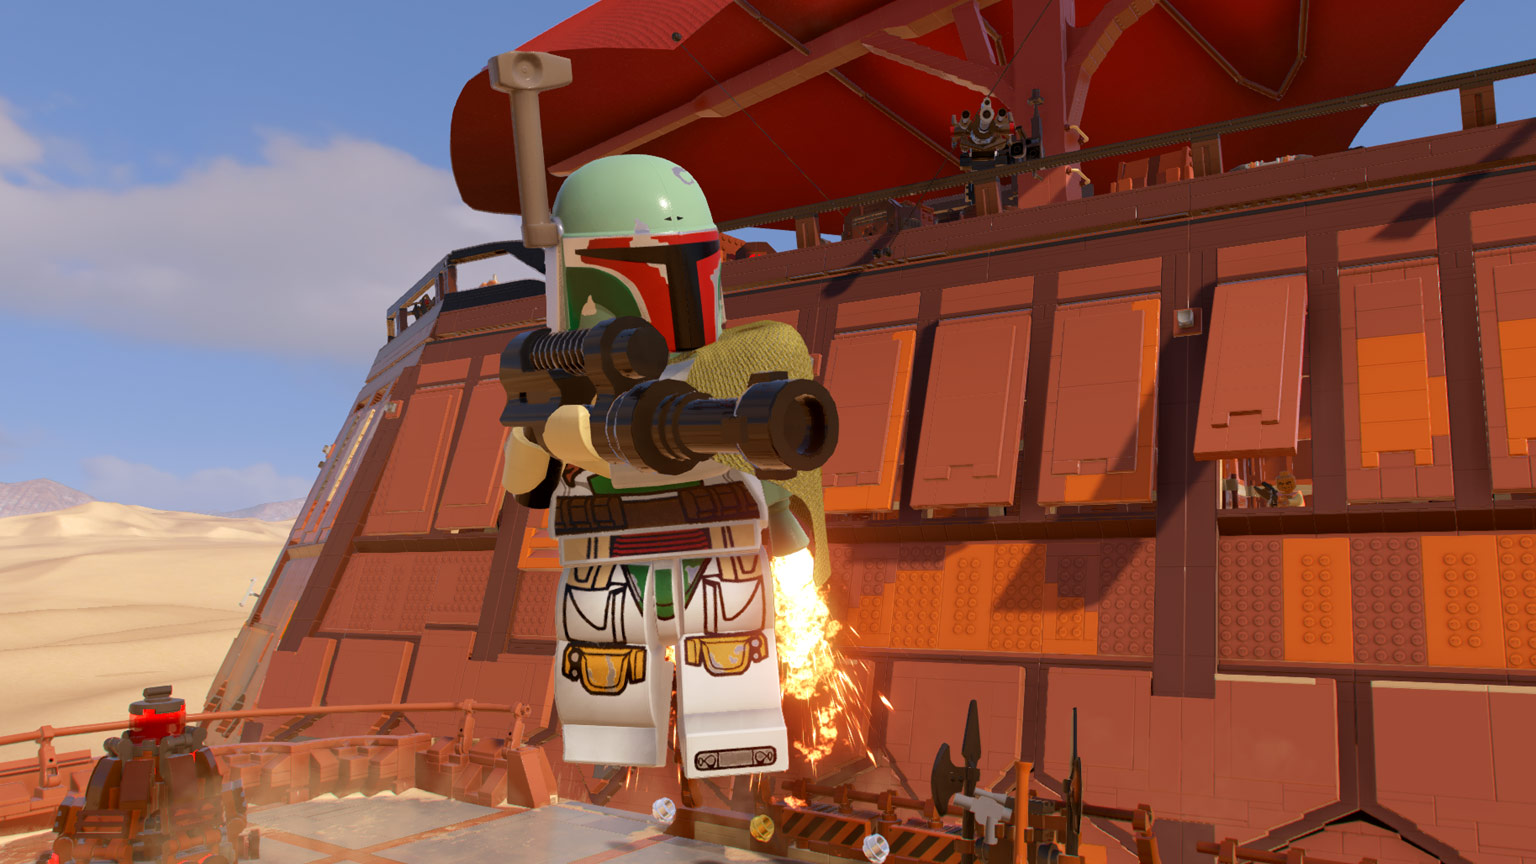 LEGO Star Wars: The Skywalker Saga - Every Character, Vehicle, and